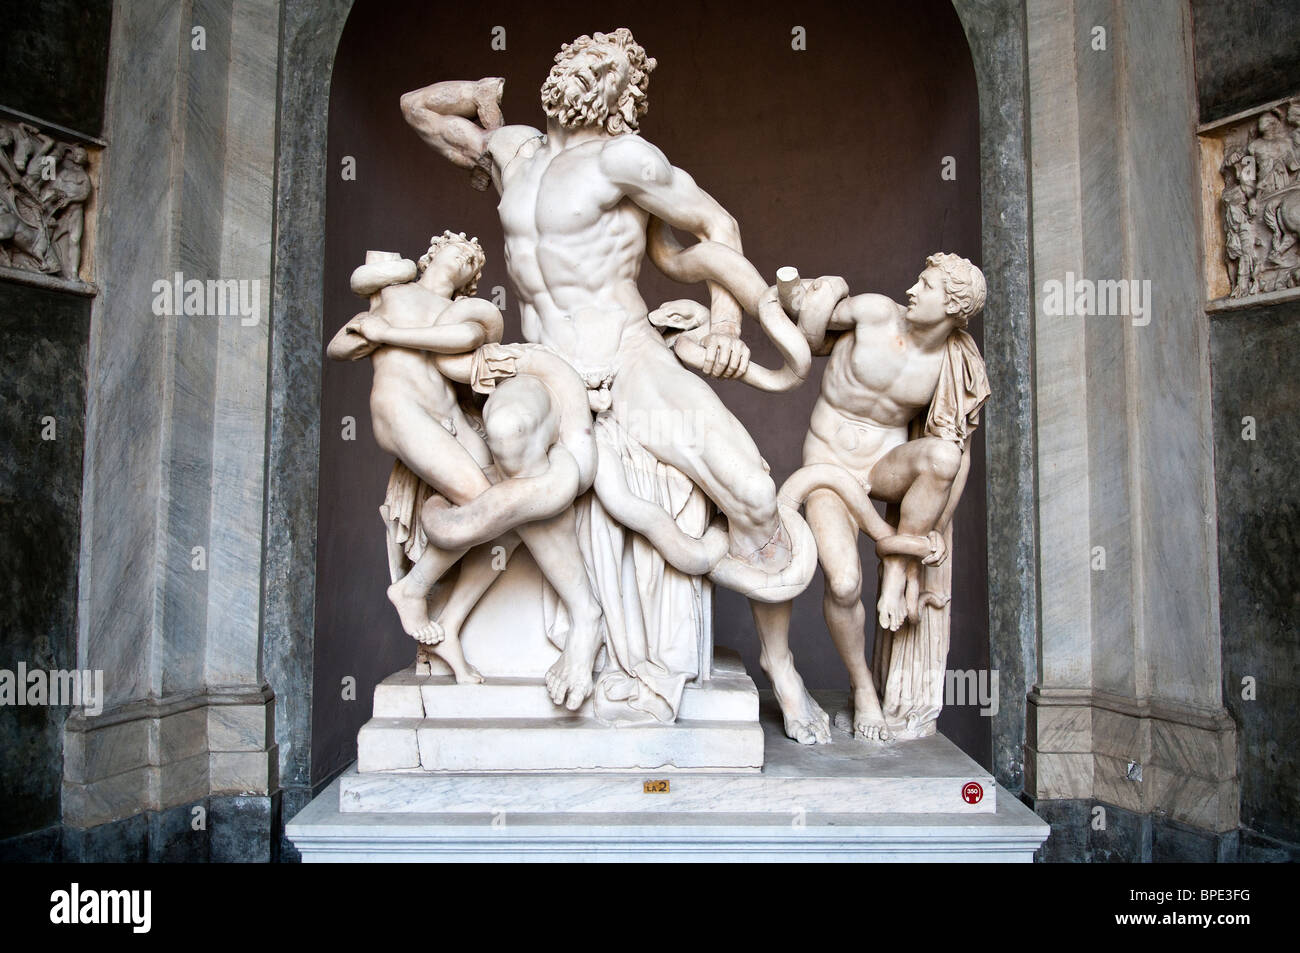 The statue of Laocoön and His Sons (Laocoön Group), Vatican Museums, Vatican City Stock Photo